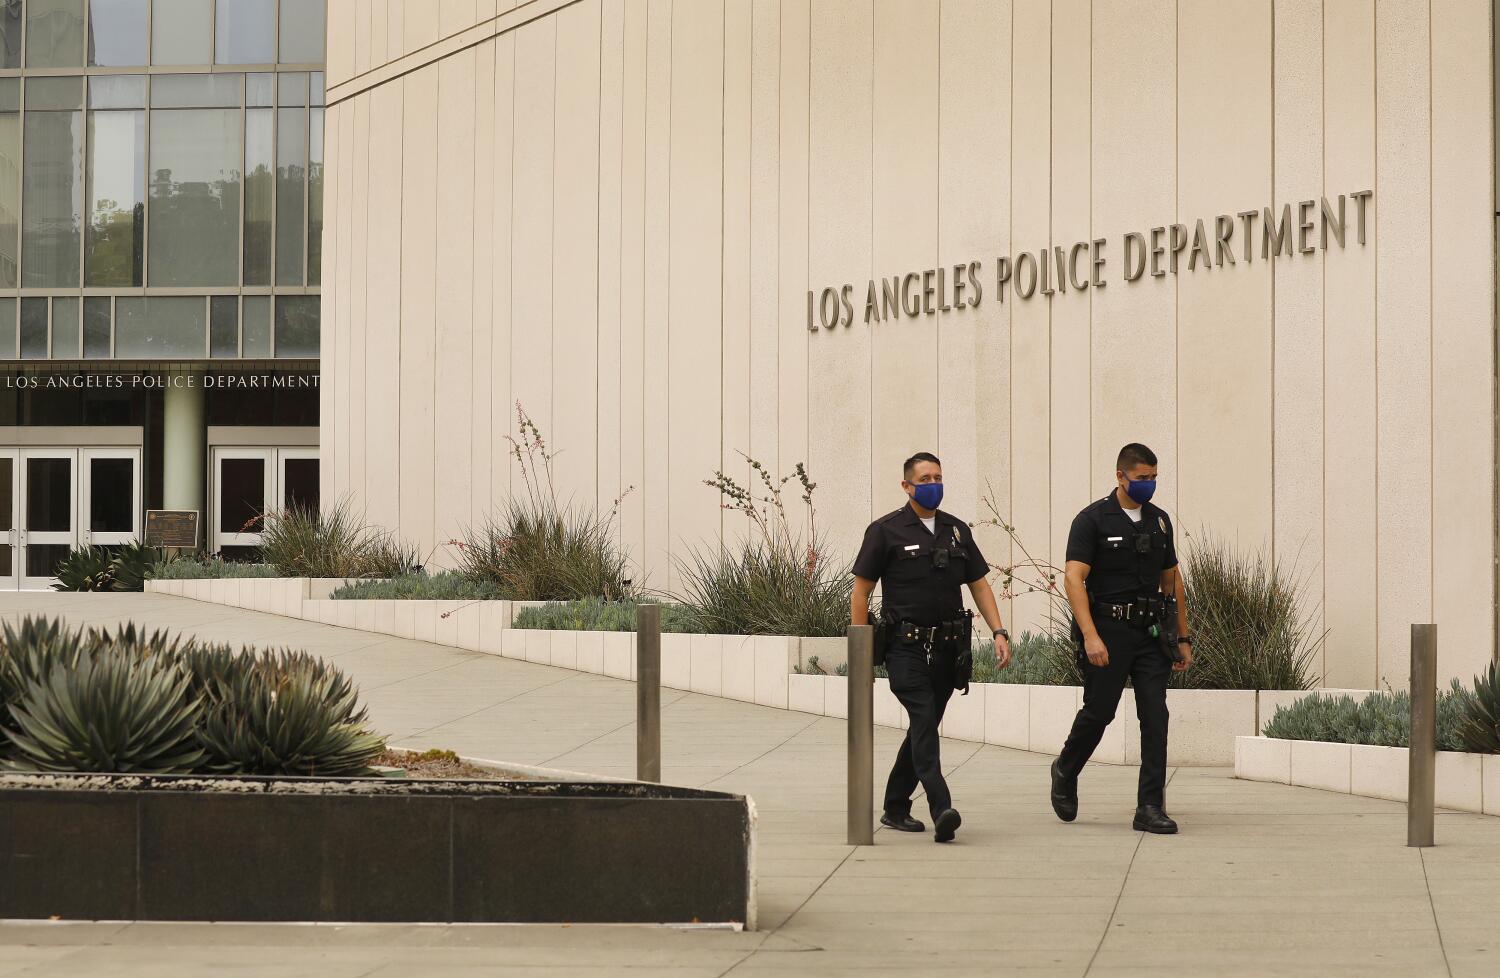 Allegations that 'intimate' photos of LAPD employee being shared on internet under investigation